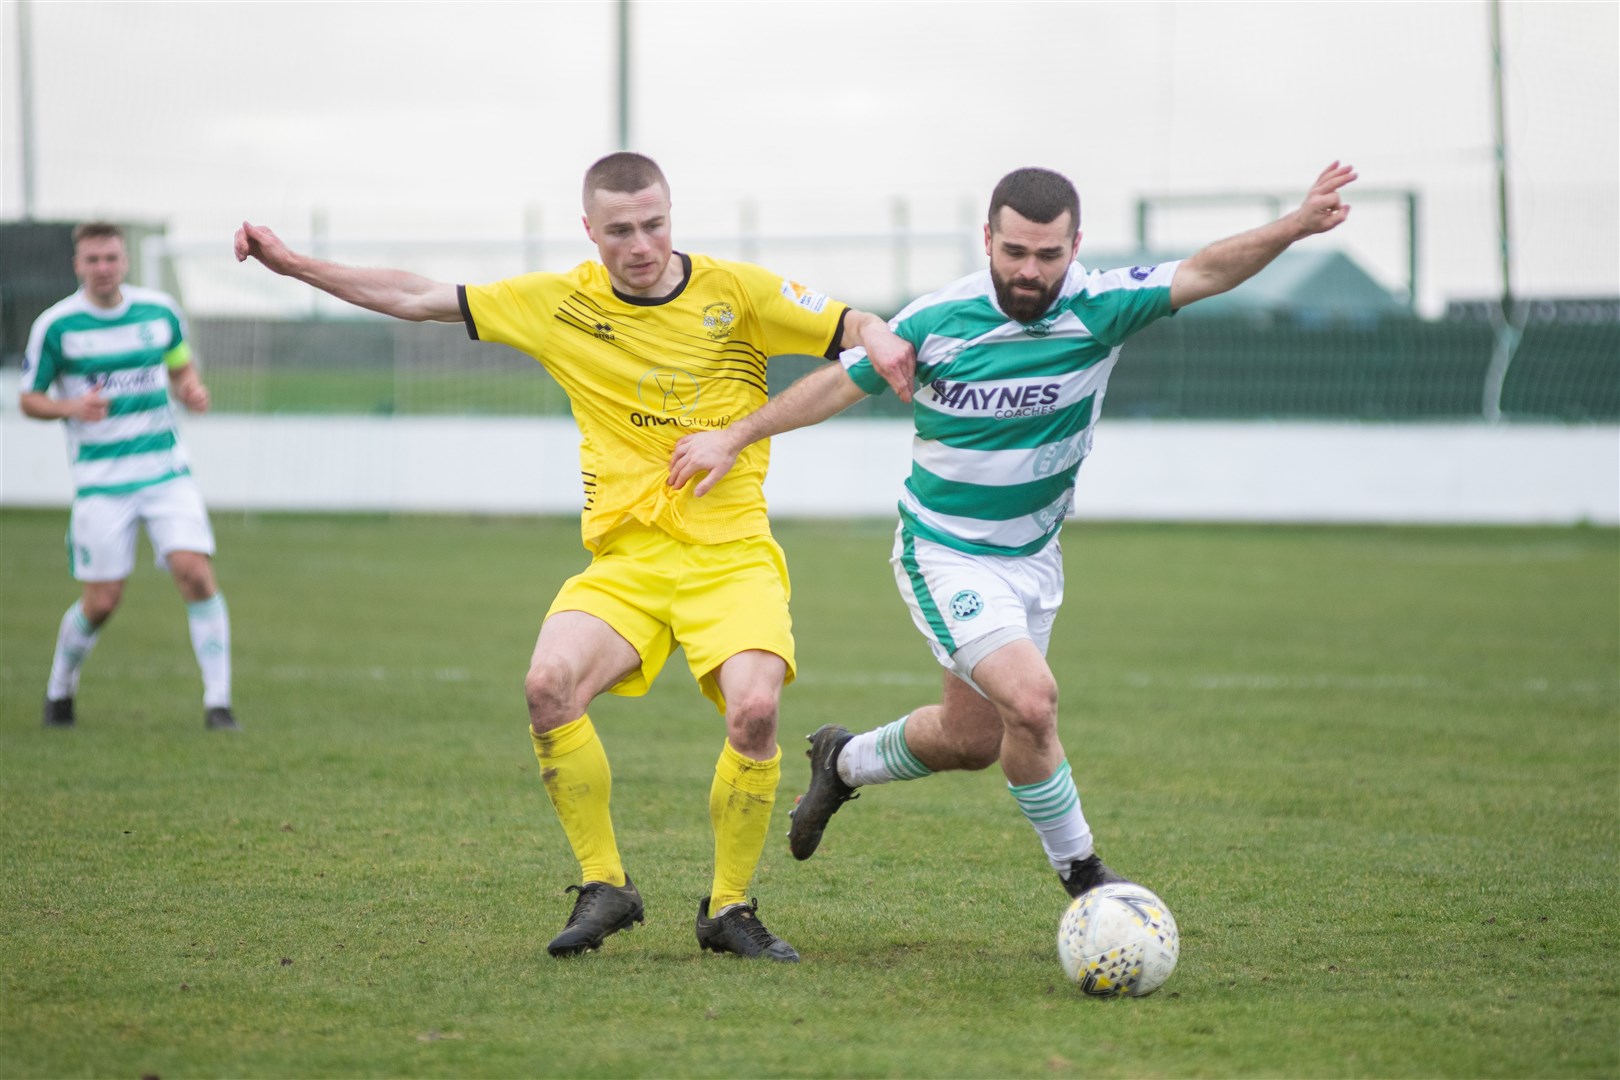 Clachnacuddin's Rorie Macleod links arms with Buckie's Andy MacAskill as the chase a ball down at Victoria Park. ..Buckie Thistle FC (5) vs Clachnacuddin FC (0) - Highland Football League 22/23 - Victoria Park, Buckie 25/02/23...Picture: Daniel Forsyth..